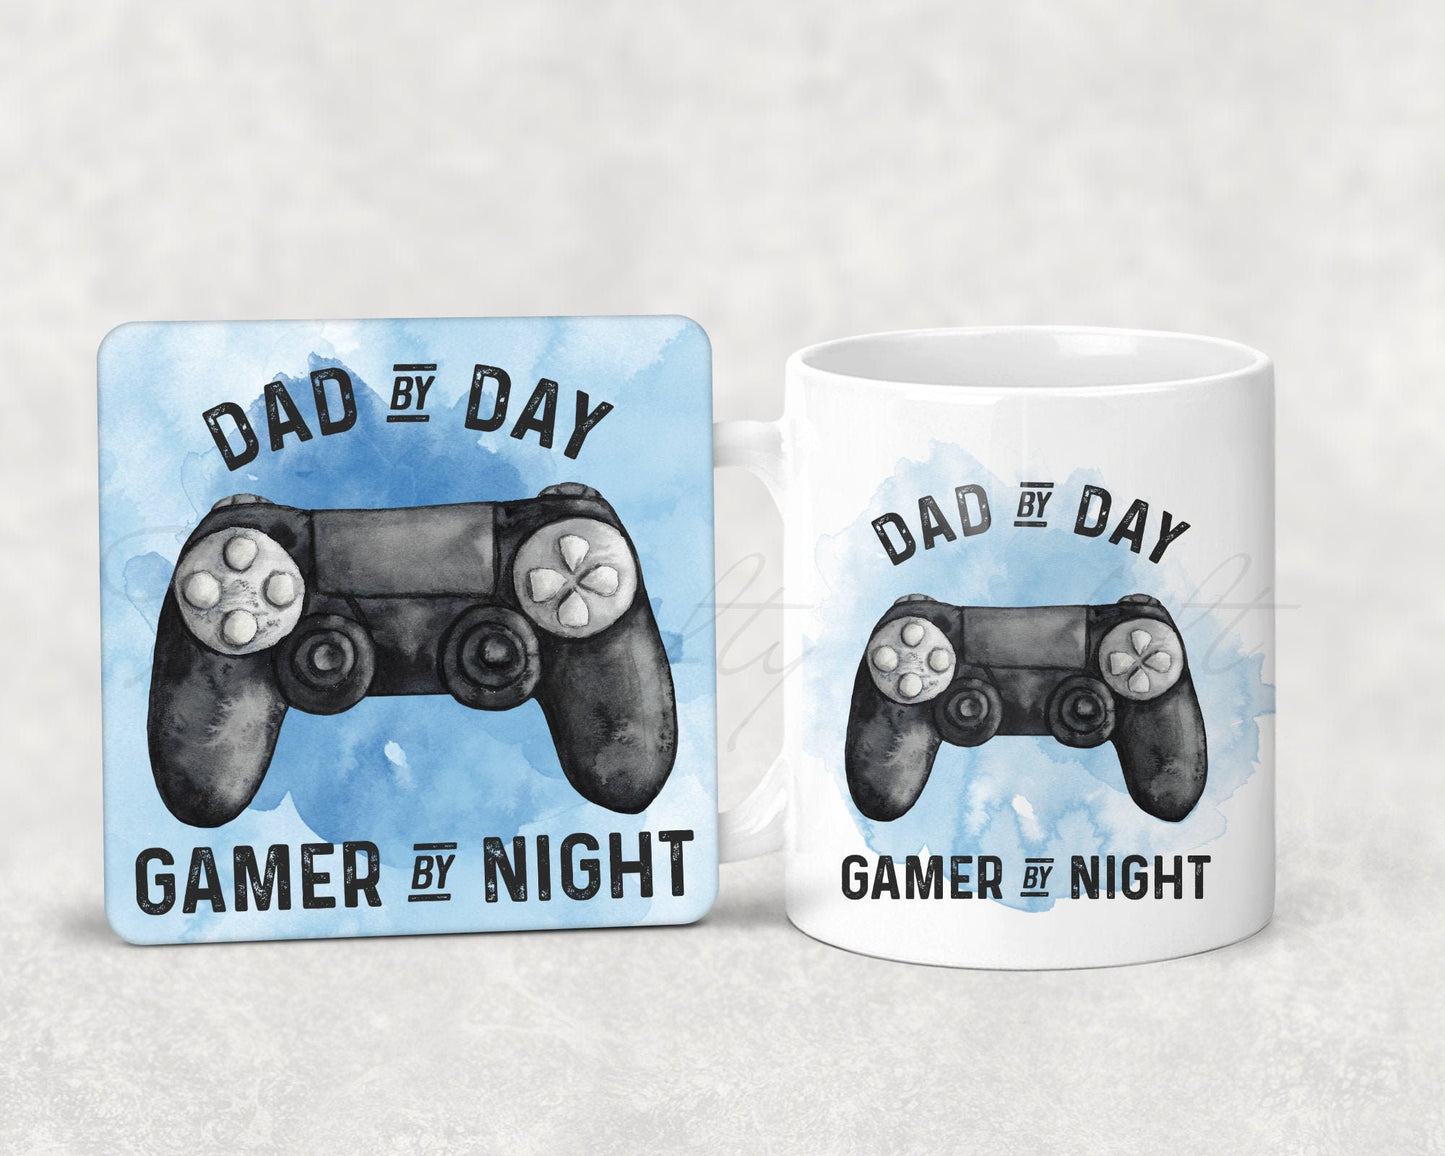 Mug and coaster set featuring a gaming design with text that reads 'dad by day, gamer by night' in blue